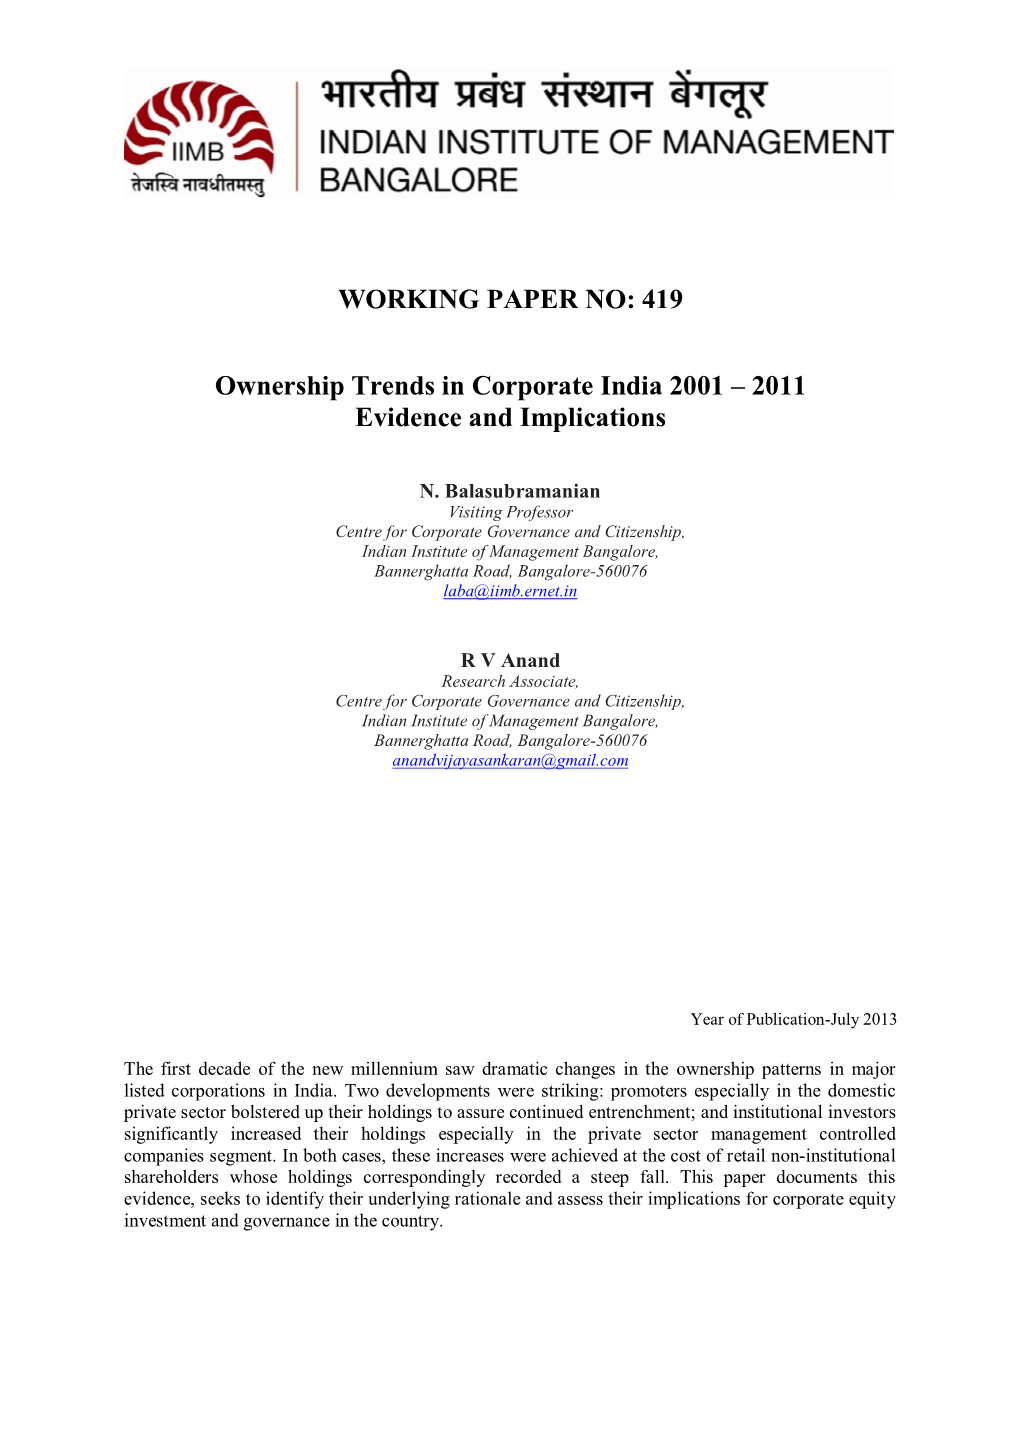 Corporate Ownership Structures in India